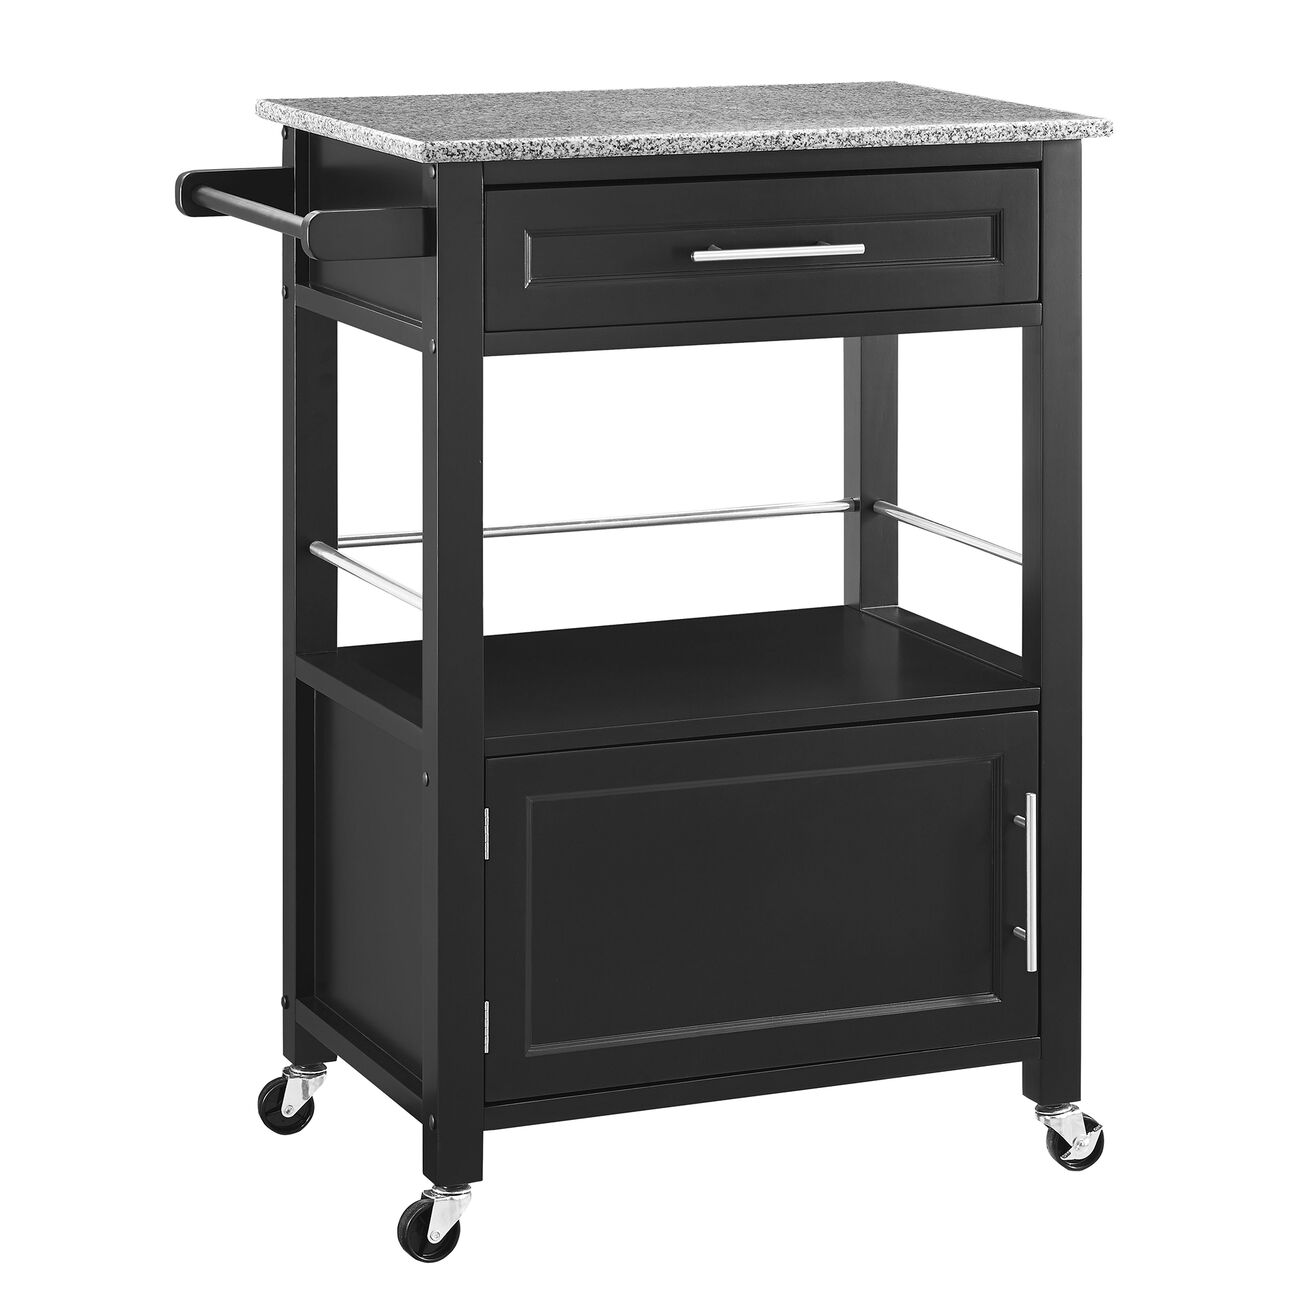 Granite Inlaid Spacious Wooden Kitchen Cart, Black and Gray